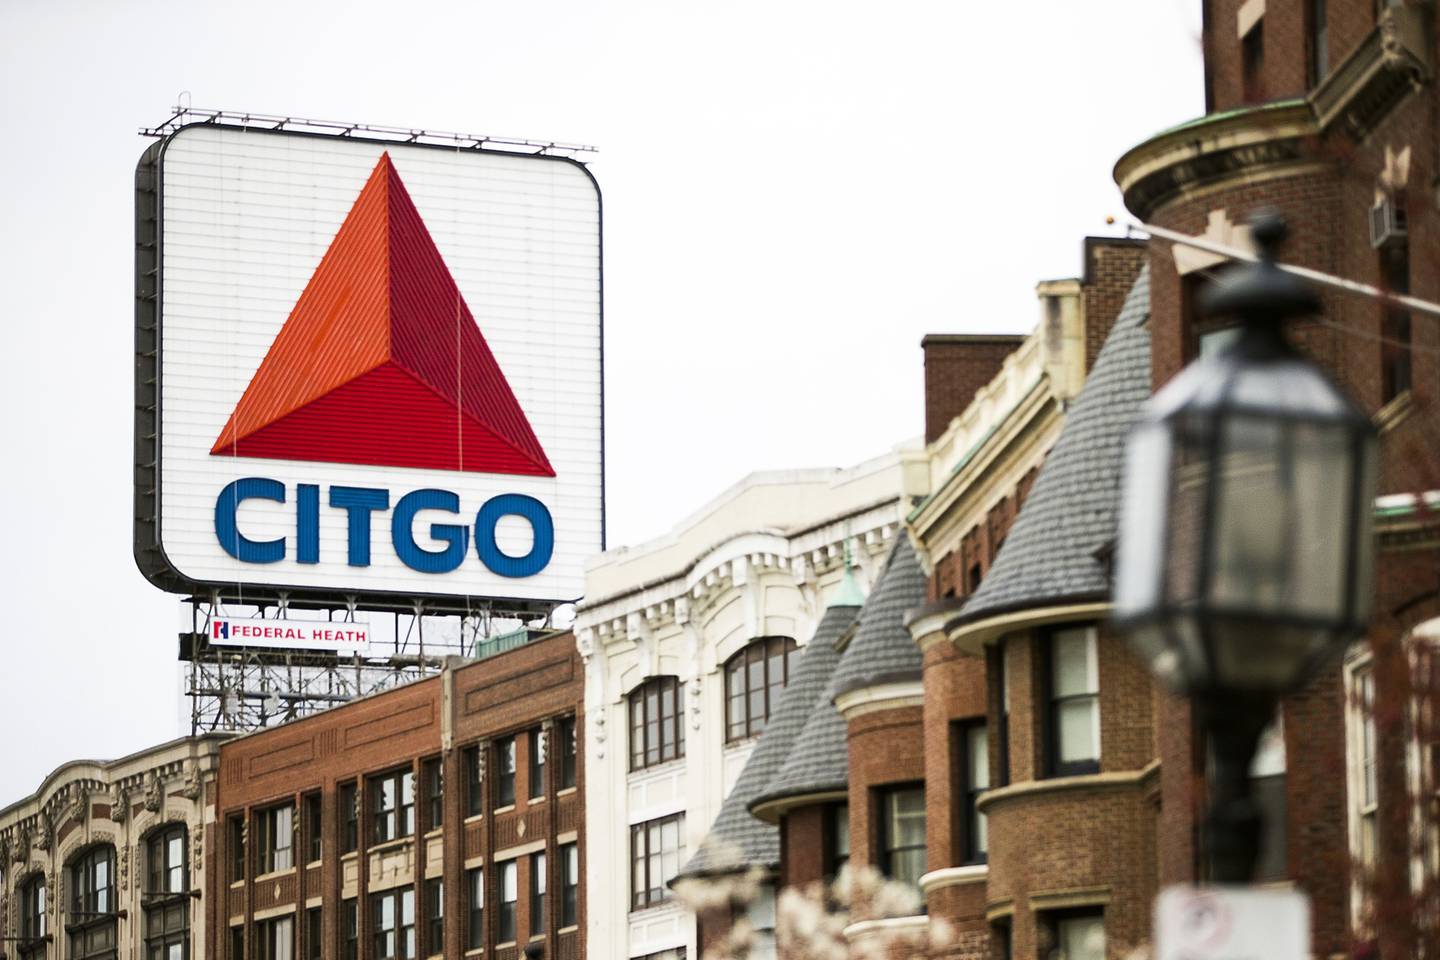 The Venezuelan opposition controls Citgo as long as the US maintains recognition of Juan Guaido as the country’s legitimate leader.